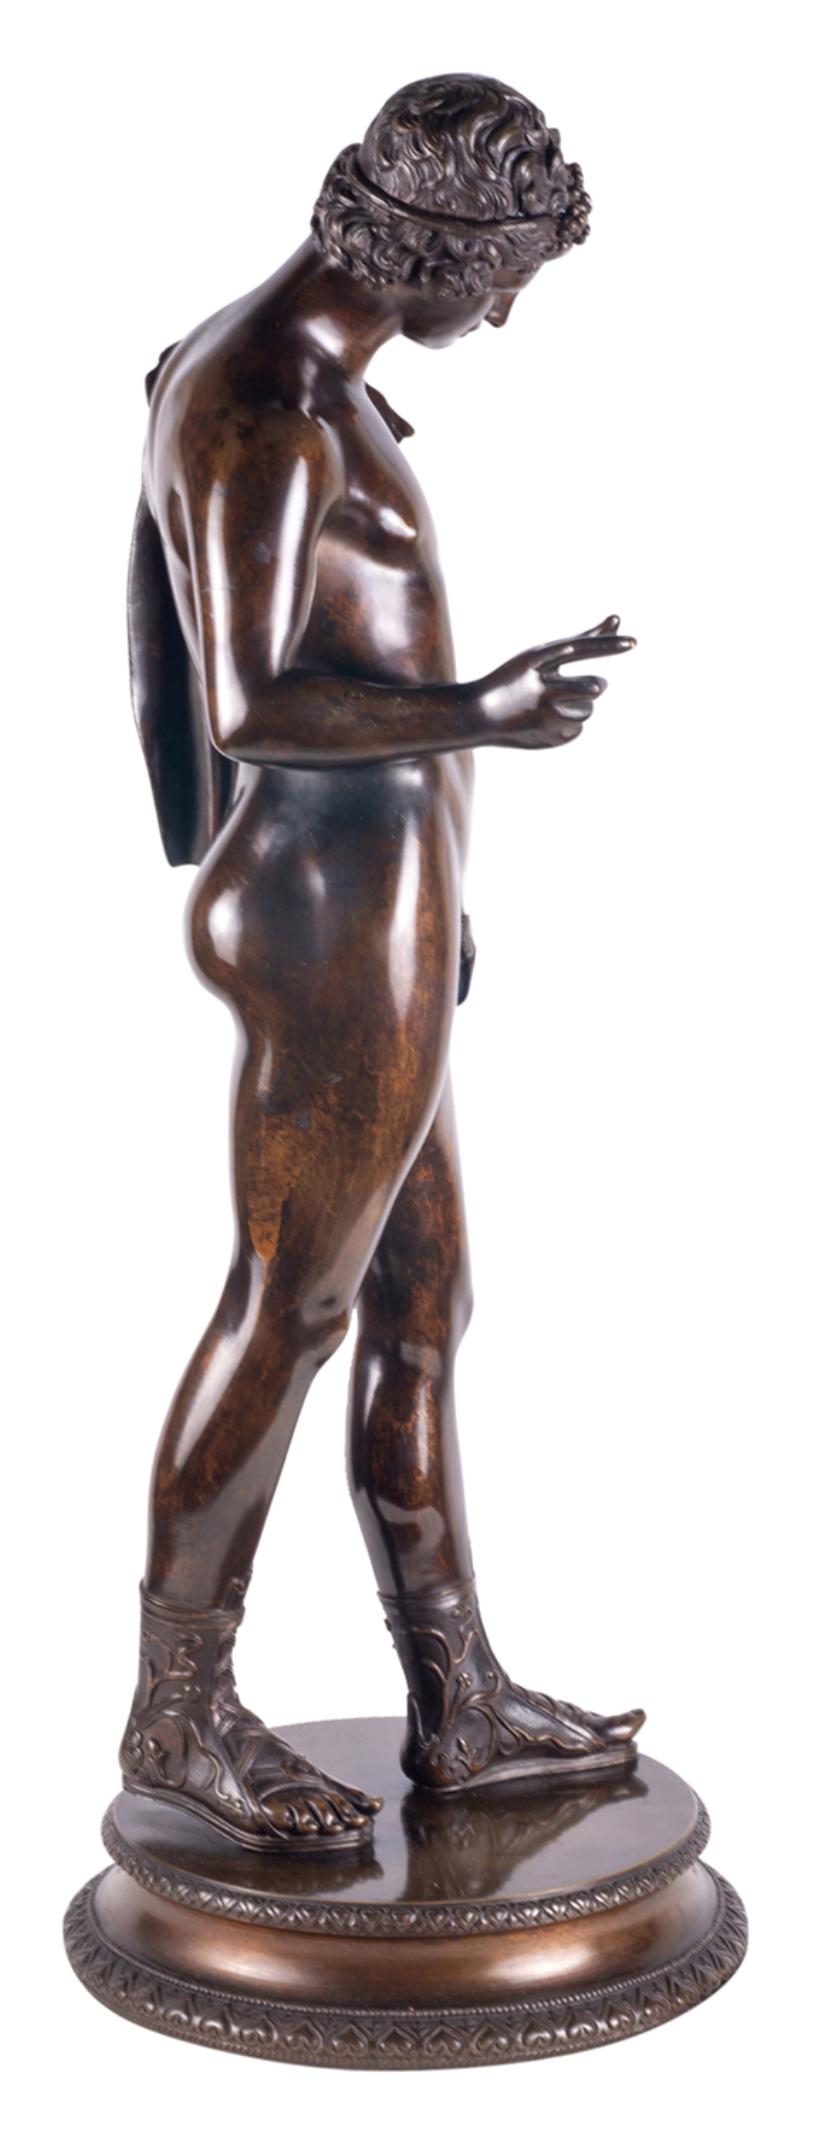 A very good quality Grand Tour patinated bronze figure of Narcissus, dating from the last quarter of the 19th century.

Narcissus was a hunter in Greek mythology and he was distinguished for his beauty.

This well patinated bronze classical